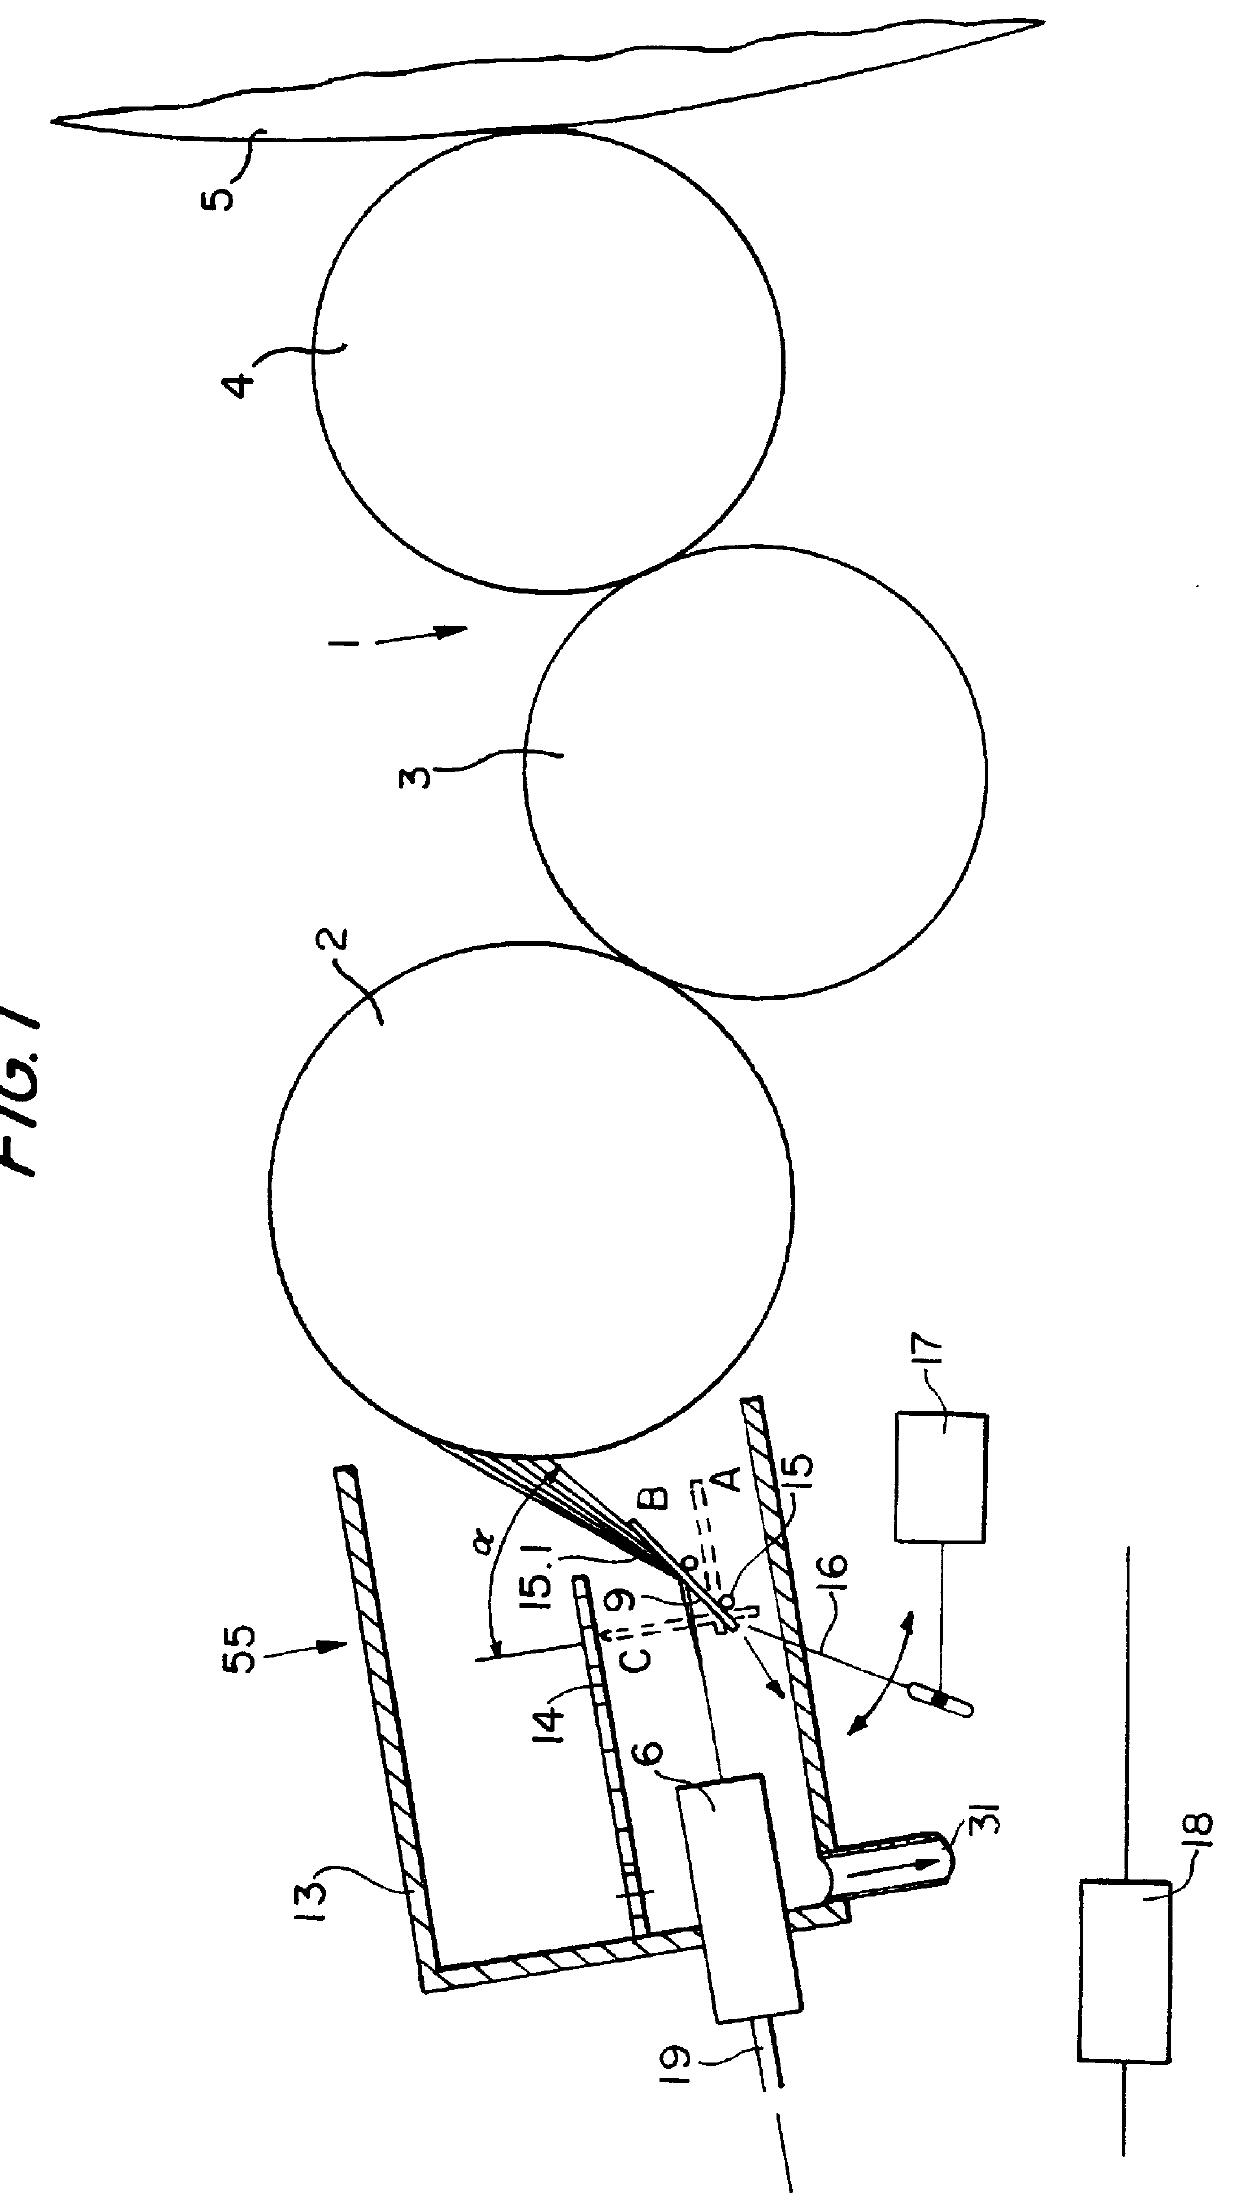 Device for applying wetting agent to a cylinder of a rotary printing machine